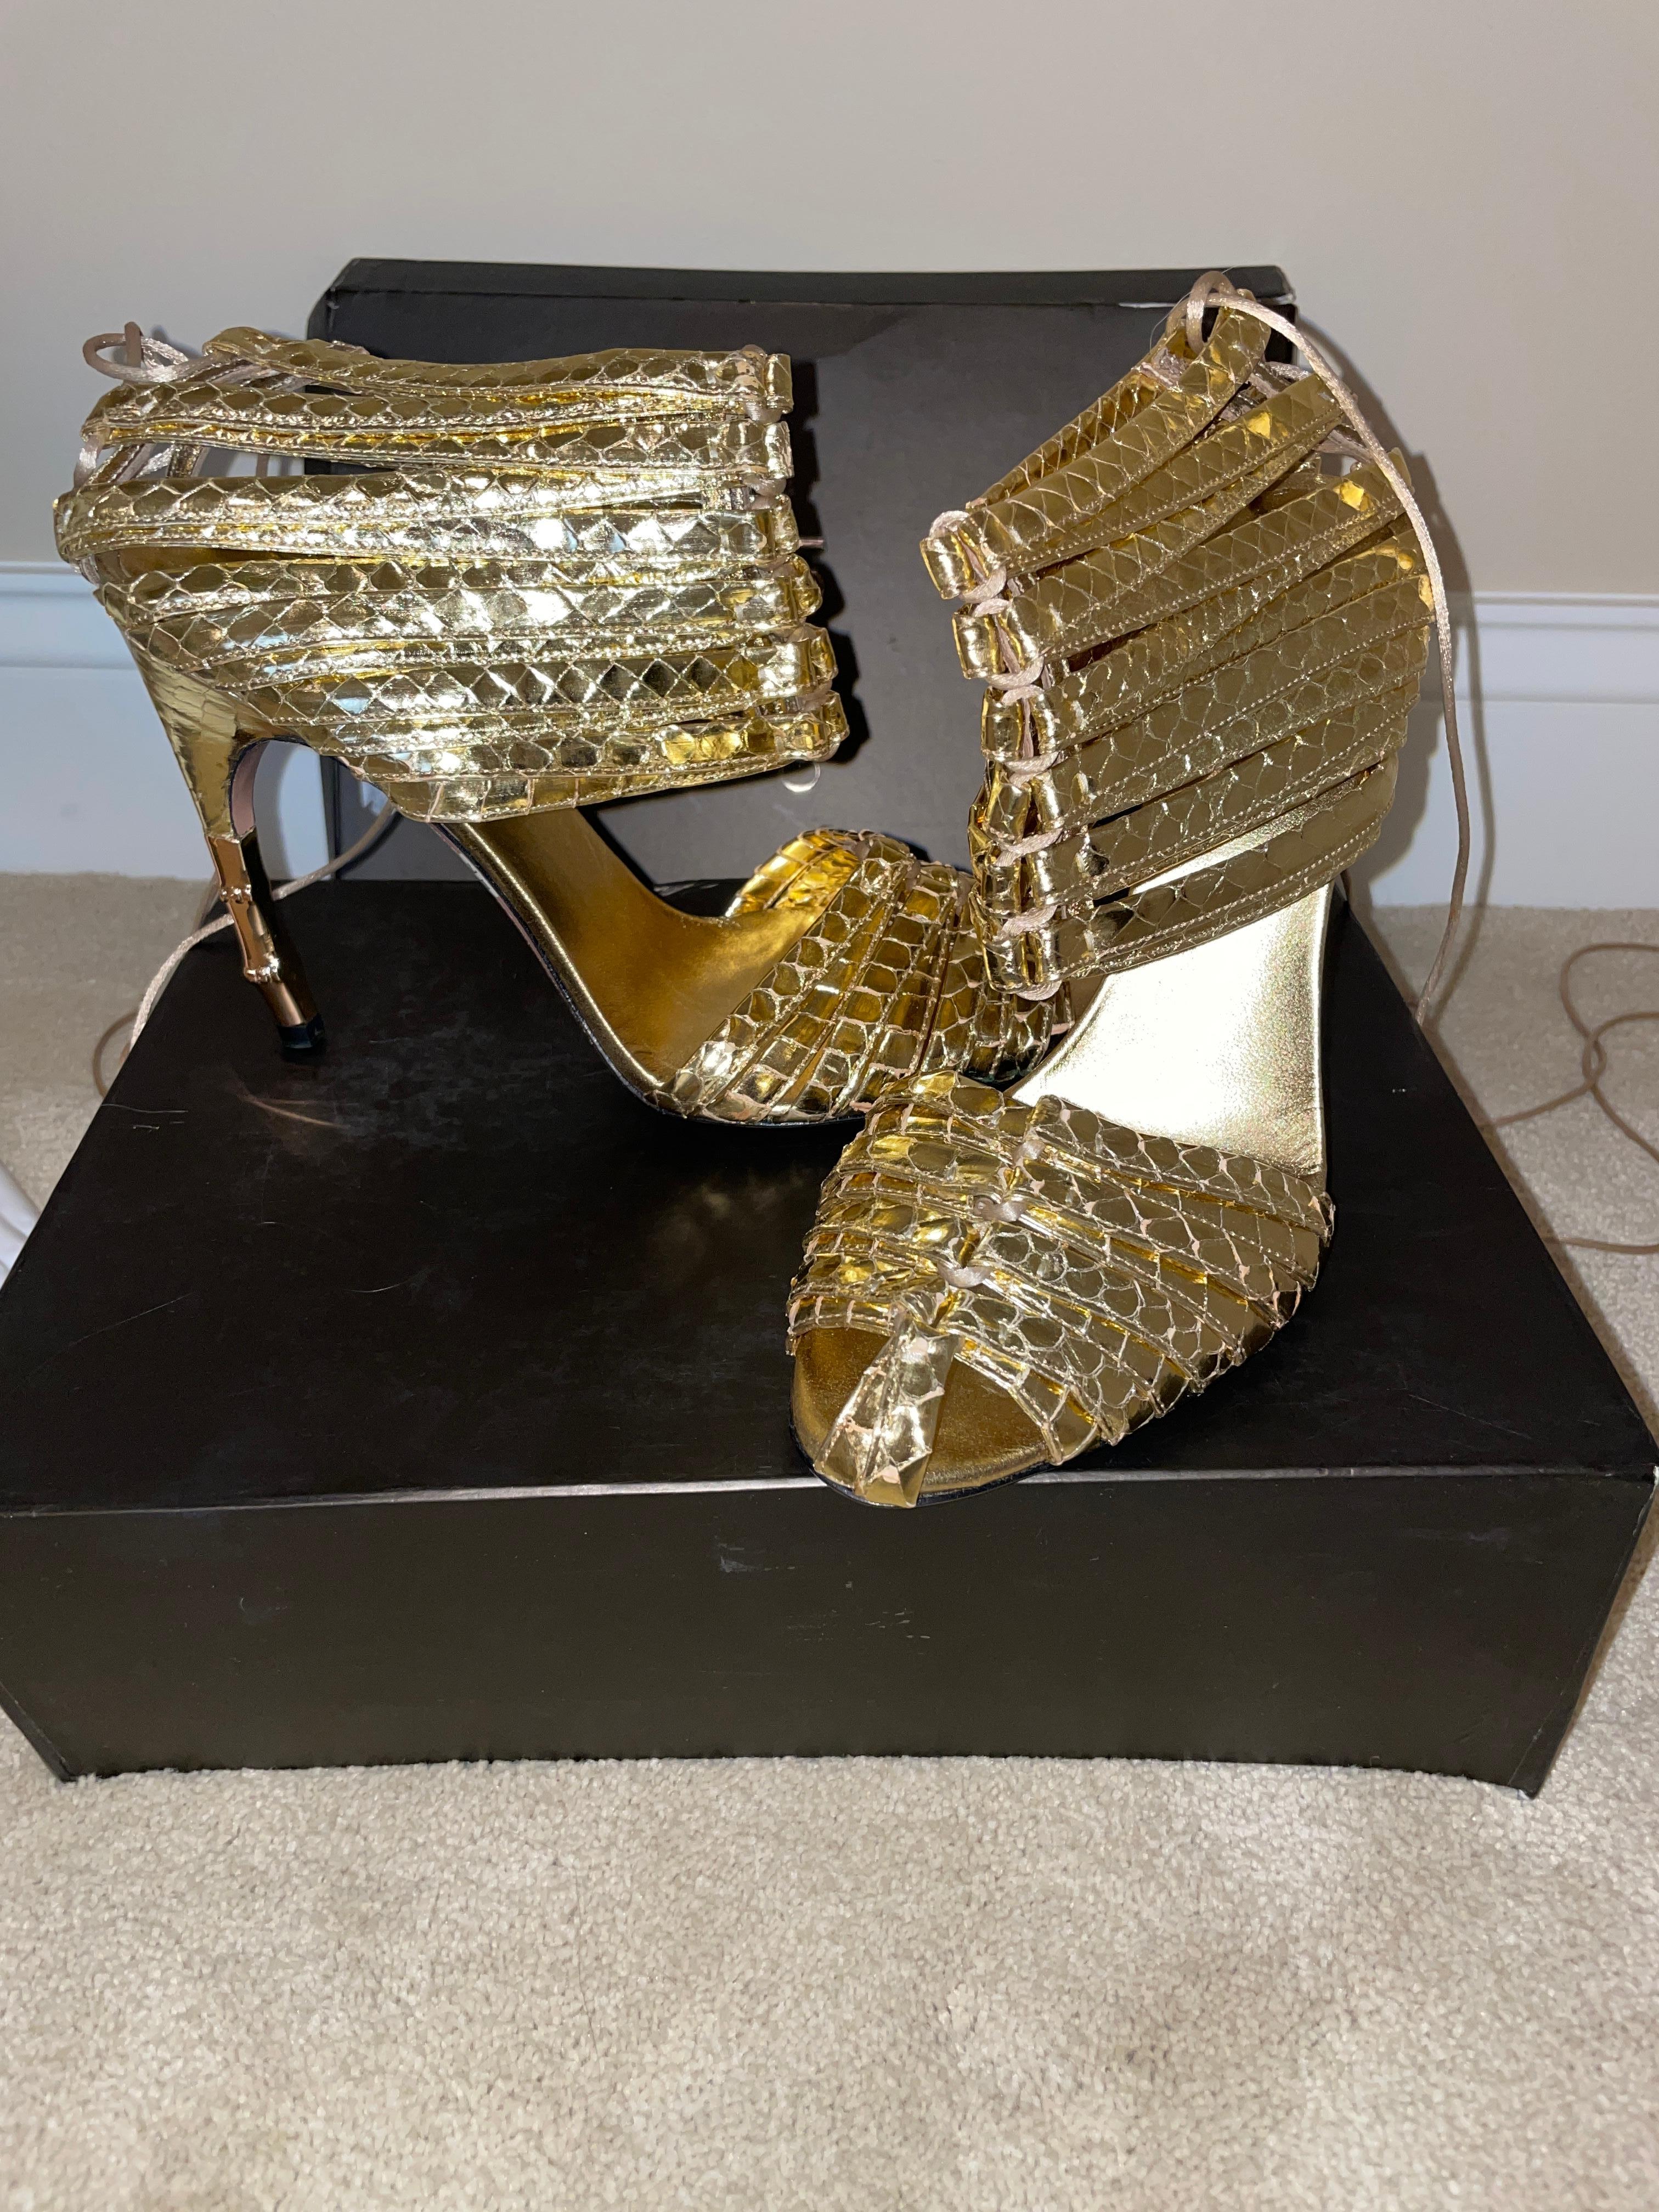 Vintage SS04 2004 Tom Ford for Gucci gold corset heels. New in box. The box is beat up, but I will include it anyways. Iconic heels seen on the runway and in the 04 ad campaign. Size 38.5 